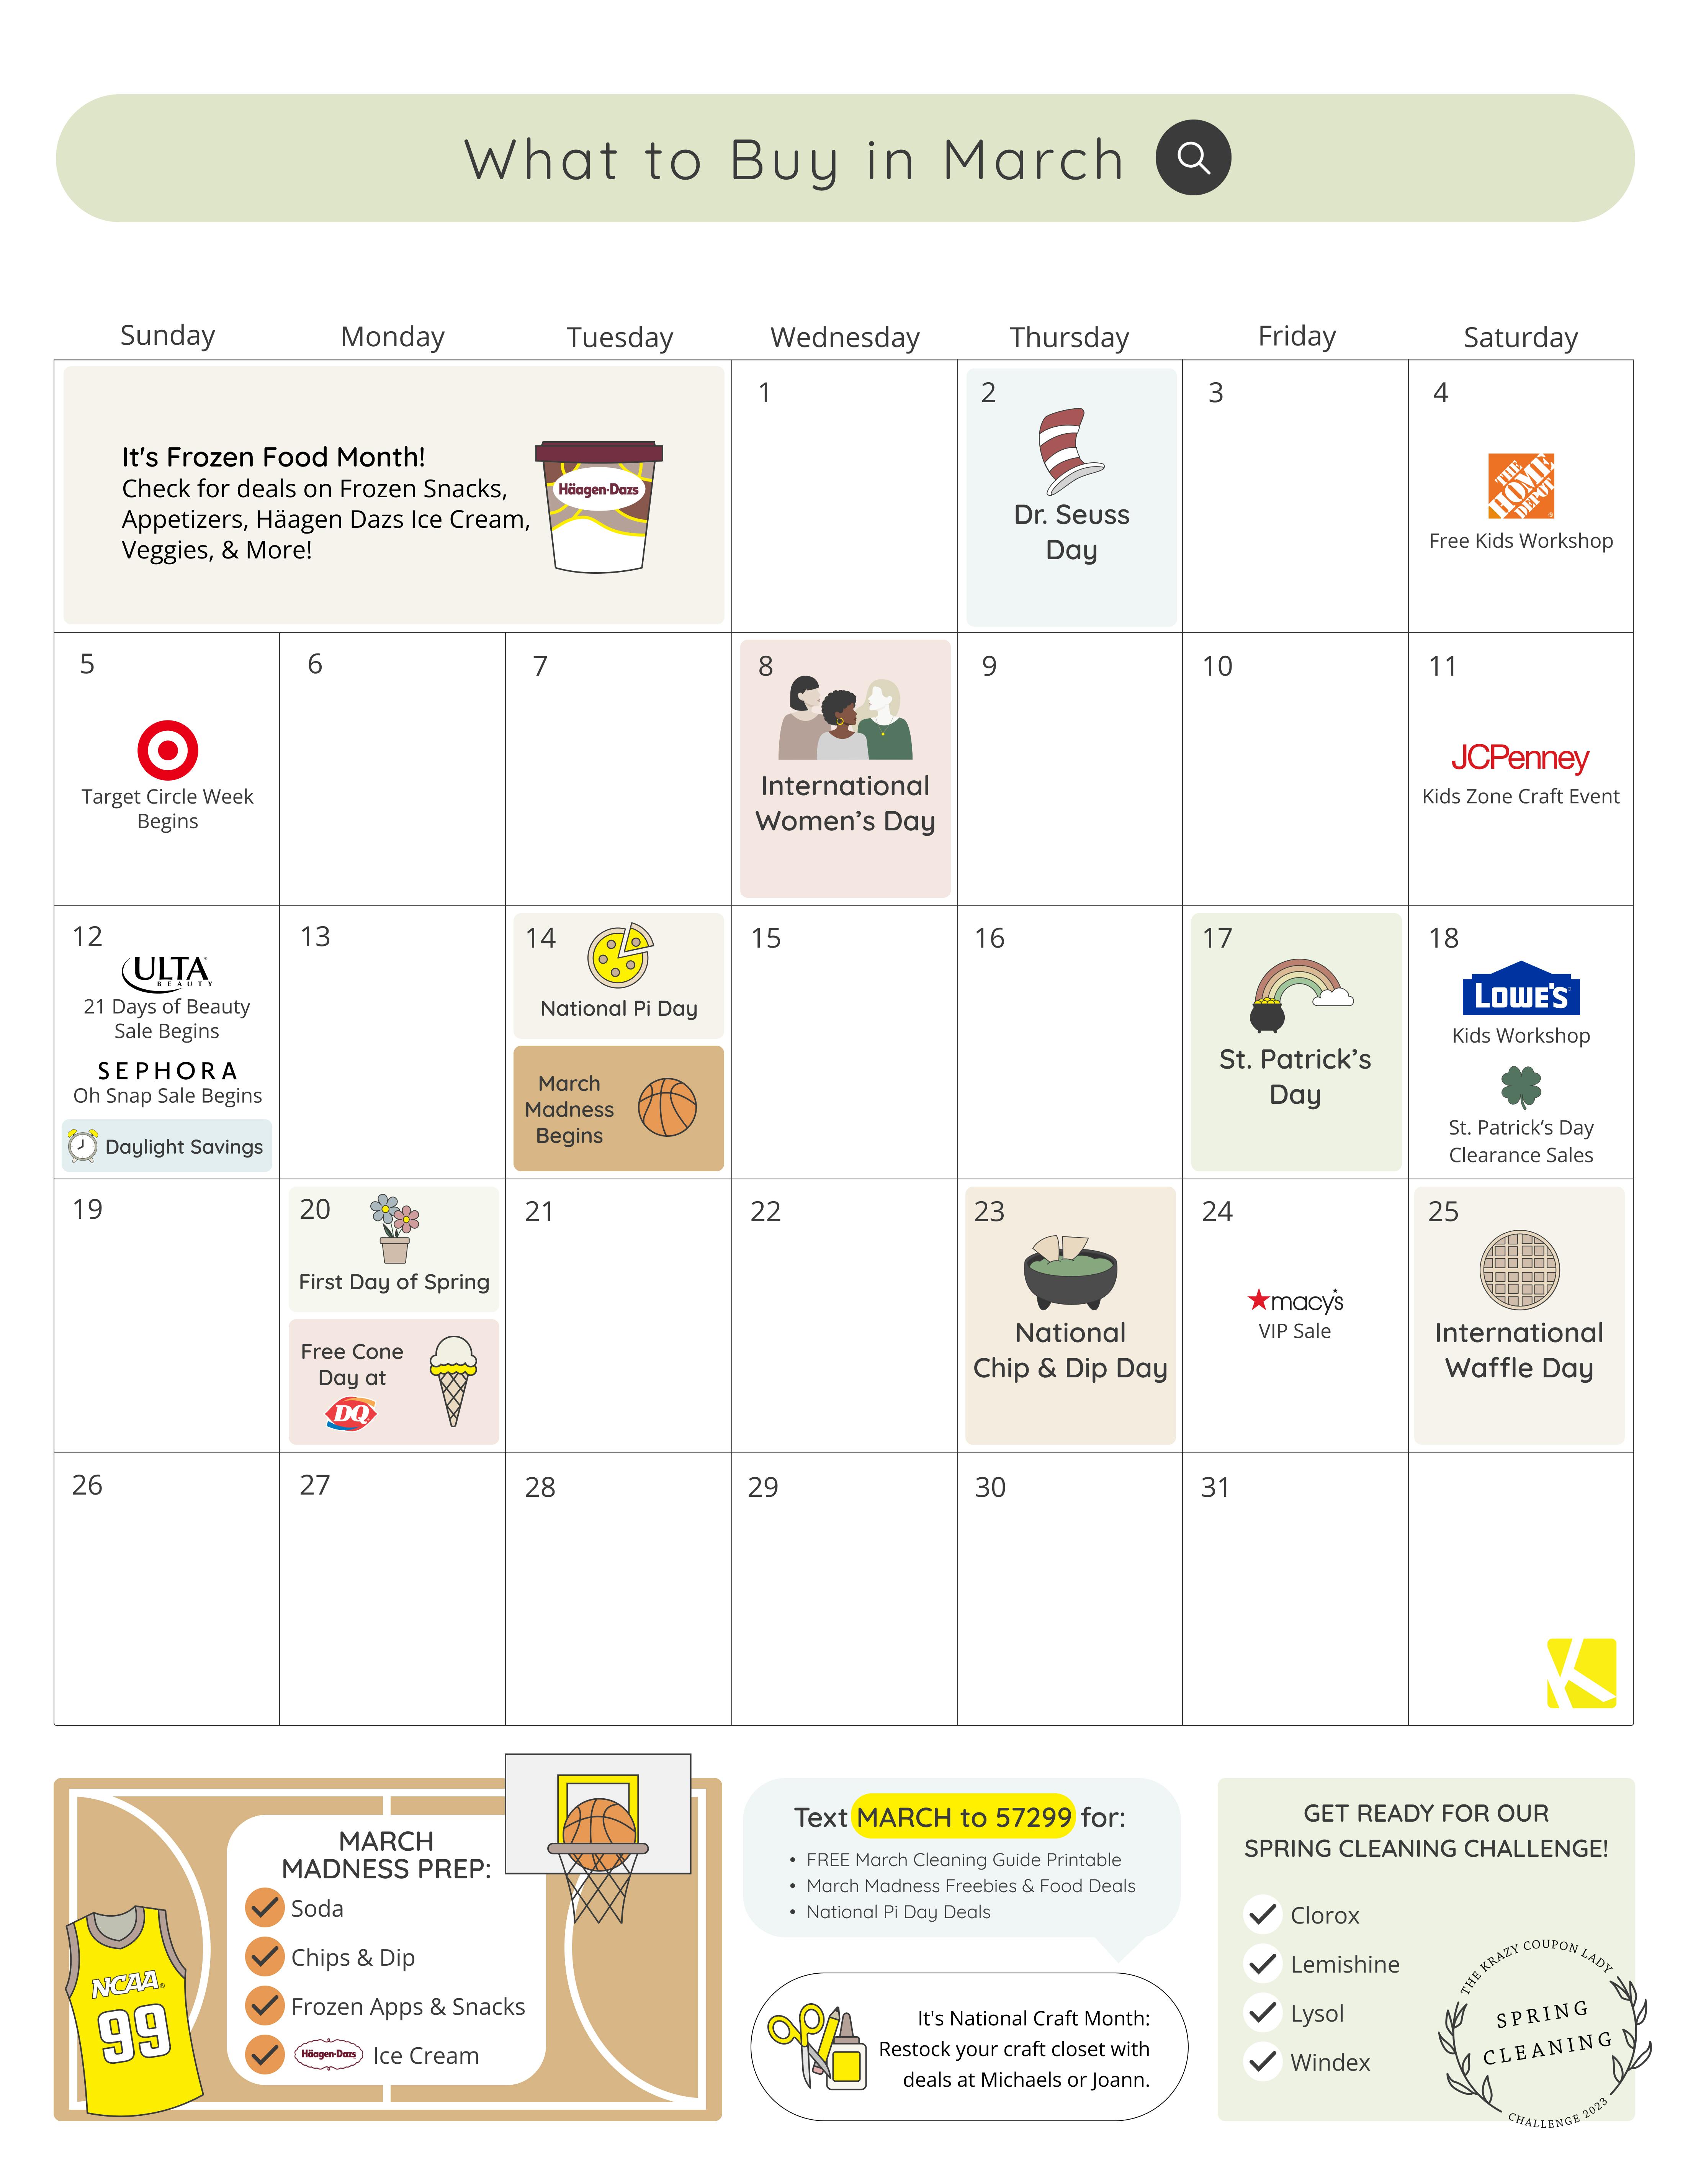 A calendar for what to buy in March and when to look for sales